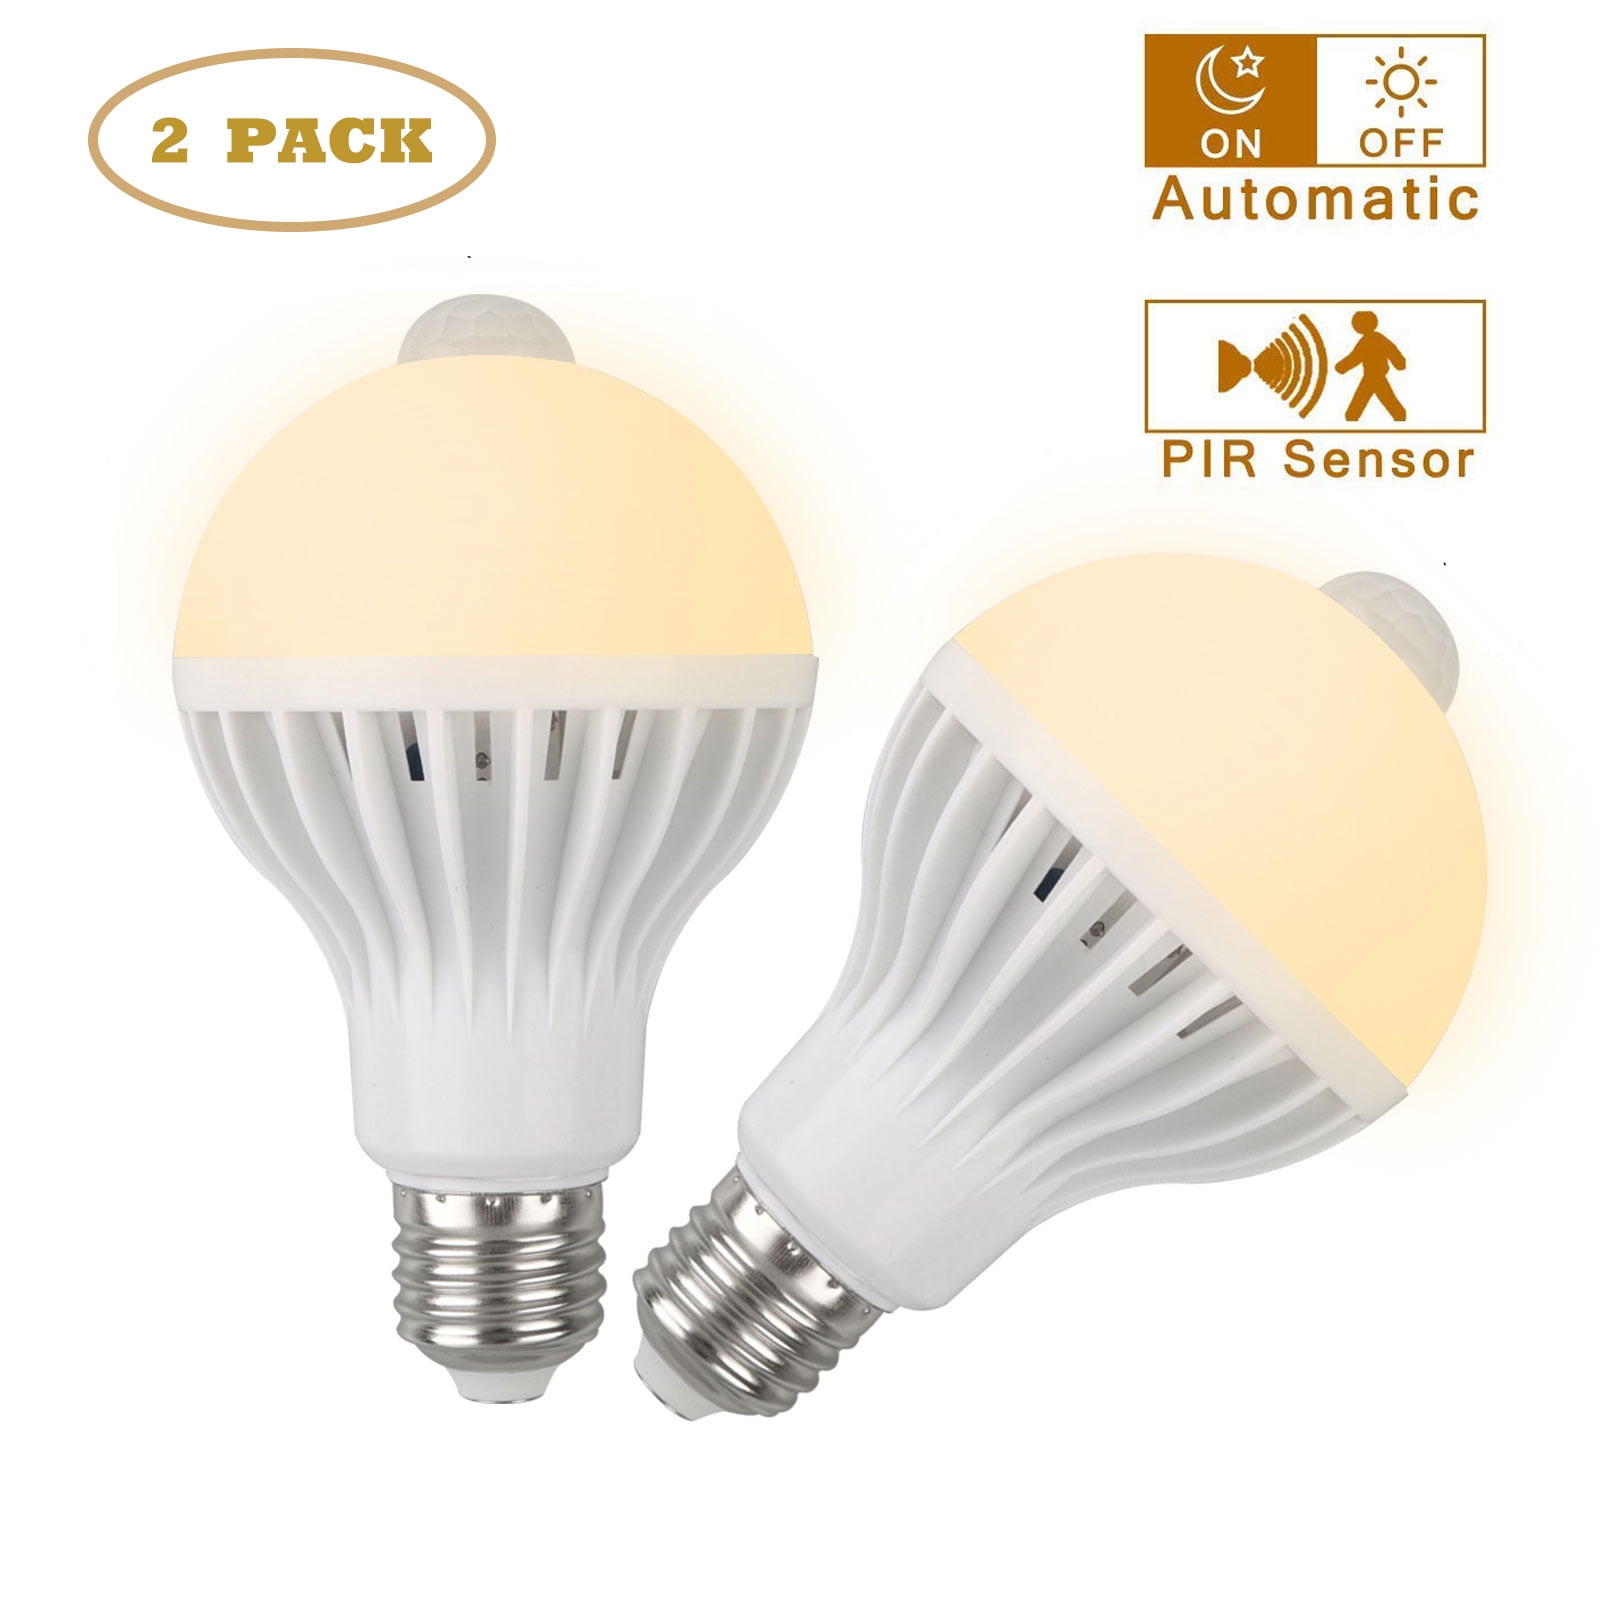 3 Pack EECOO 9W Smart PIR LED Bulbs Auto On/Off Security Lights Outdoor/Indoor 